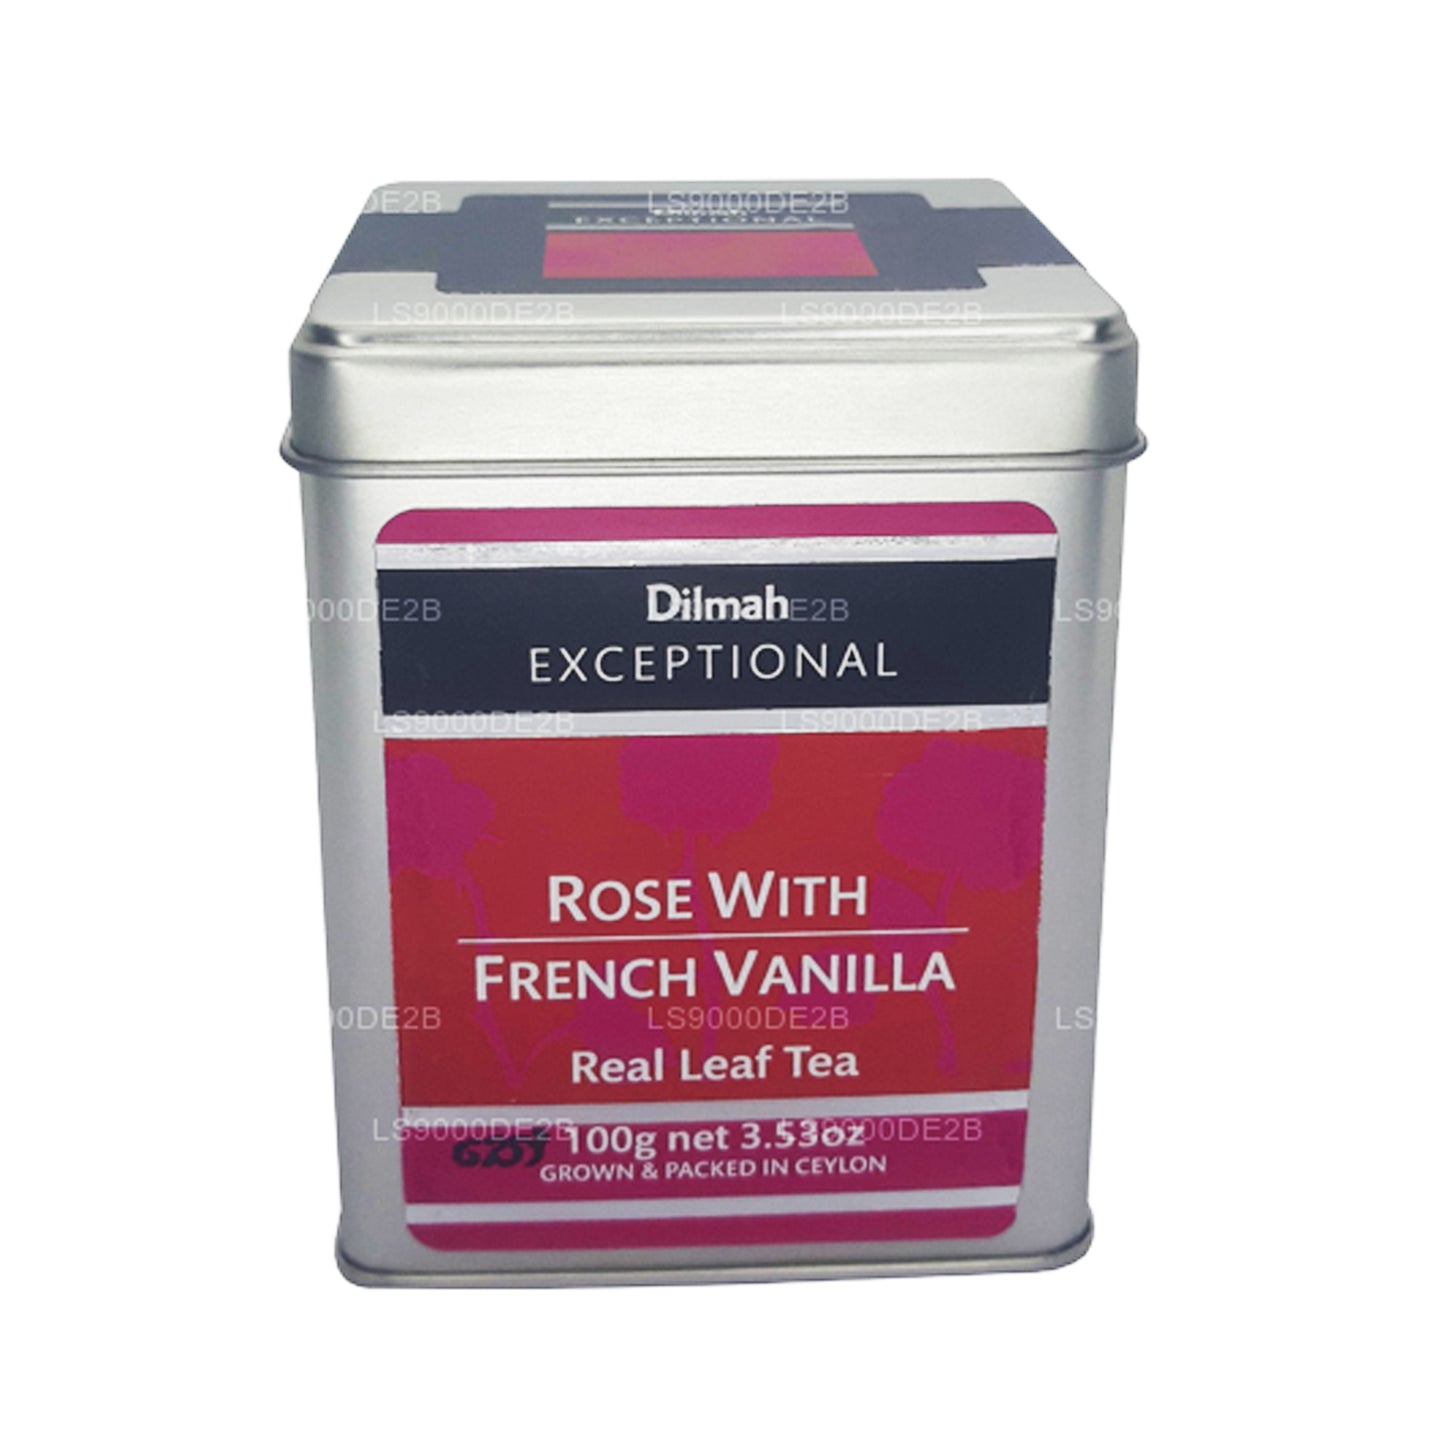 Thé Dilmah Exceptional Rose with French Vanilla Real Leaf (40g) 20 sachets de thé